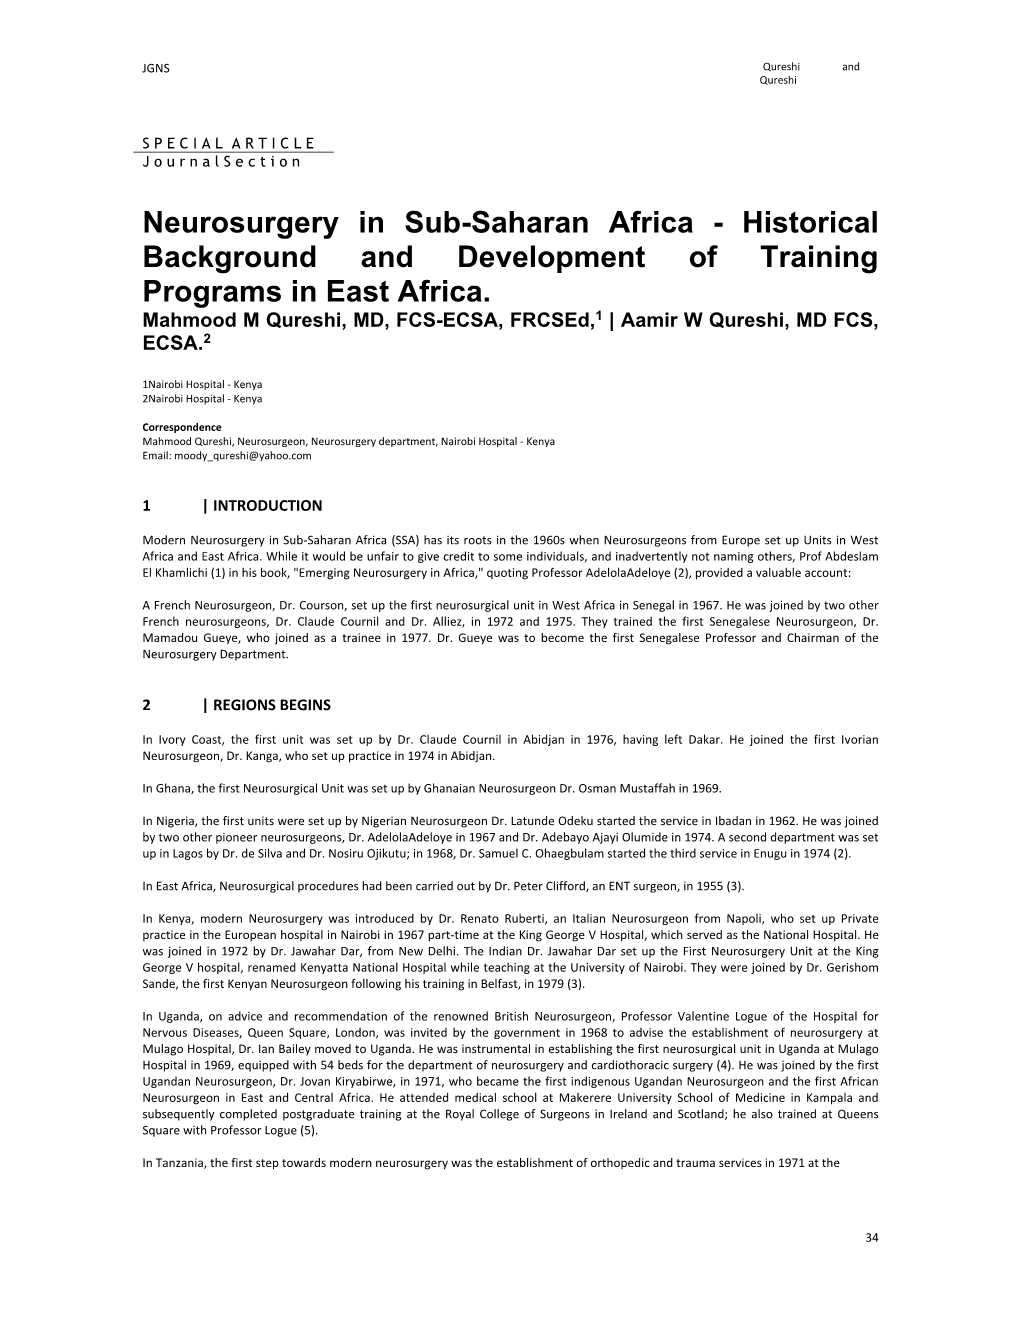 Neurosurgery in Sub-Saharan Africa - Historical Background and Development of Training Programs in East Africa